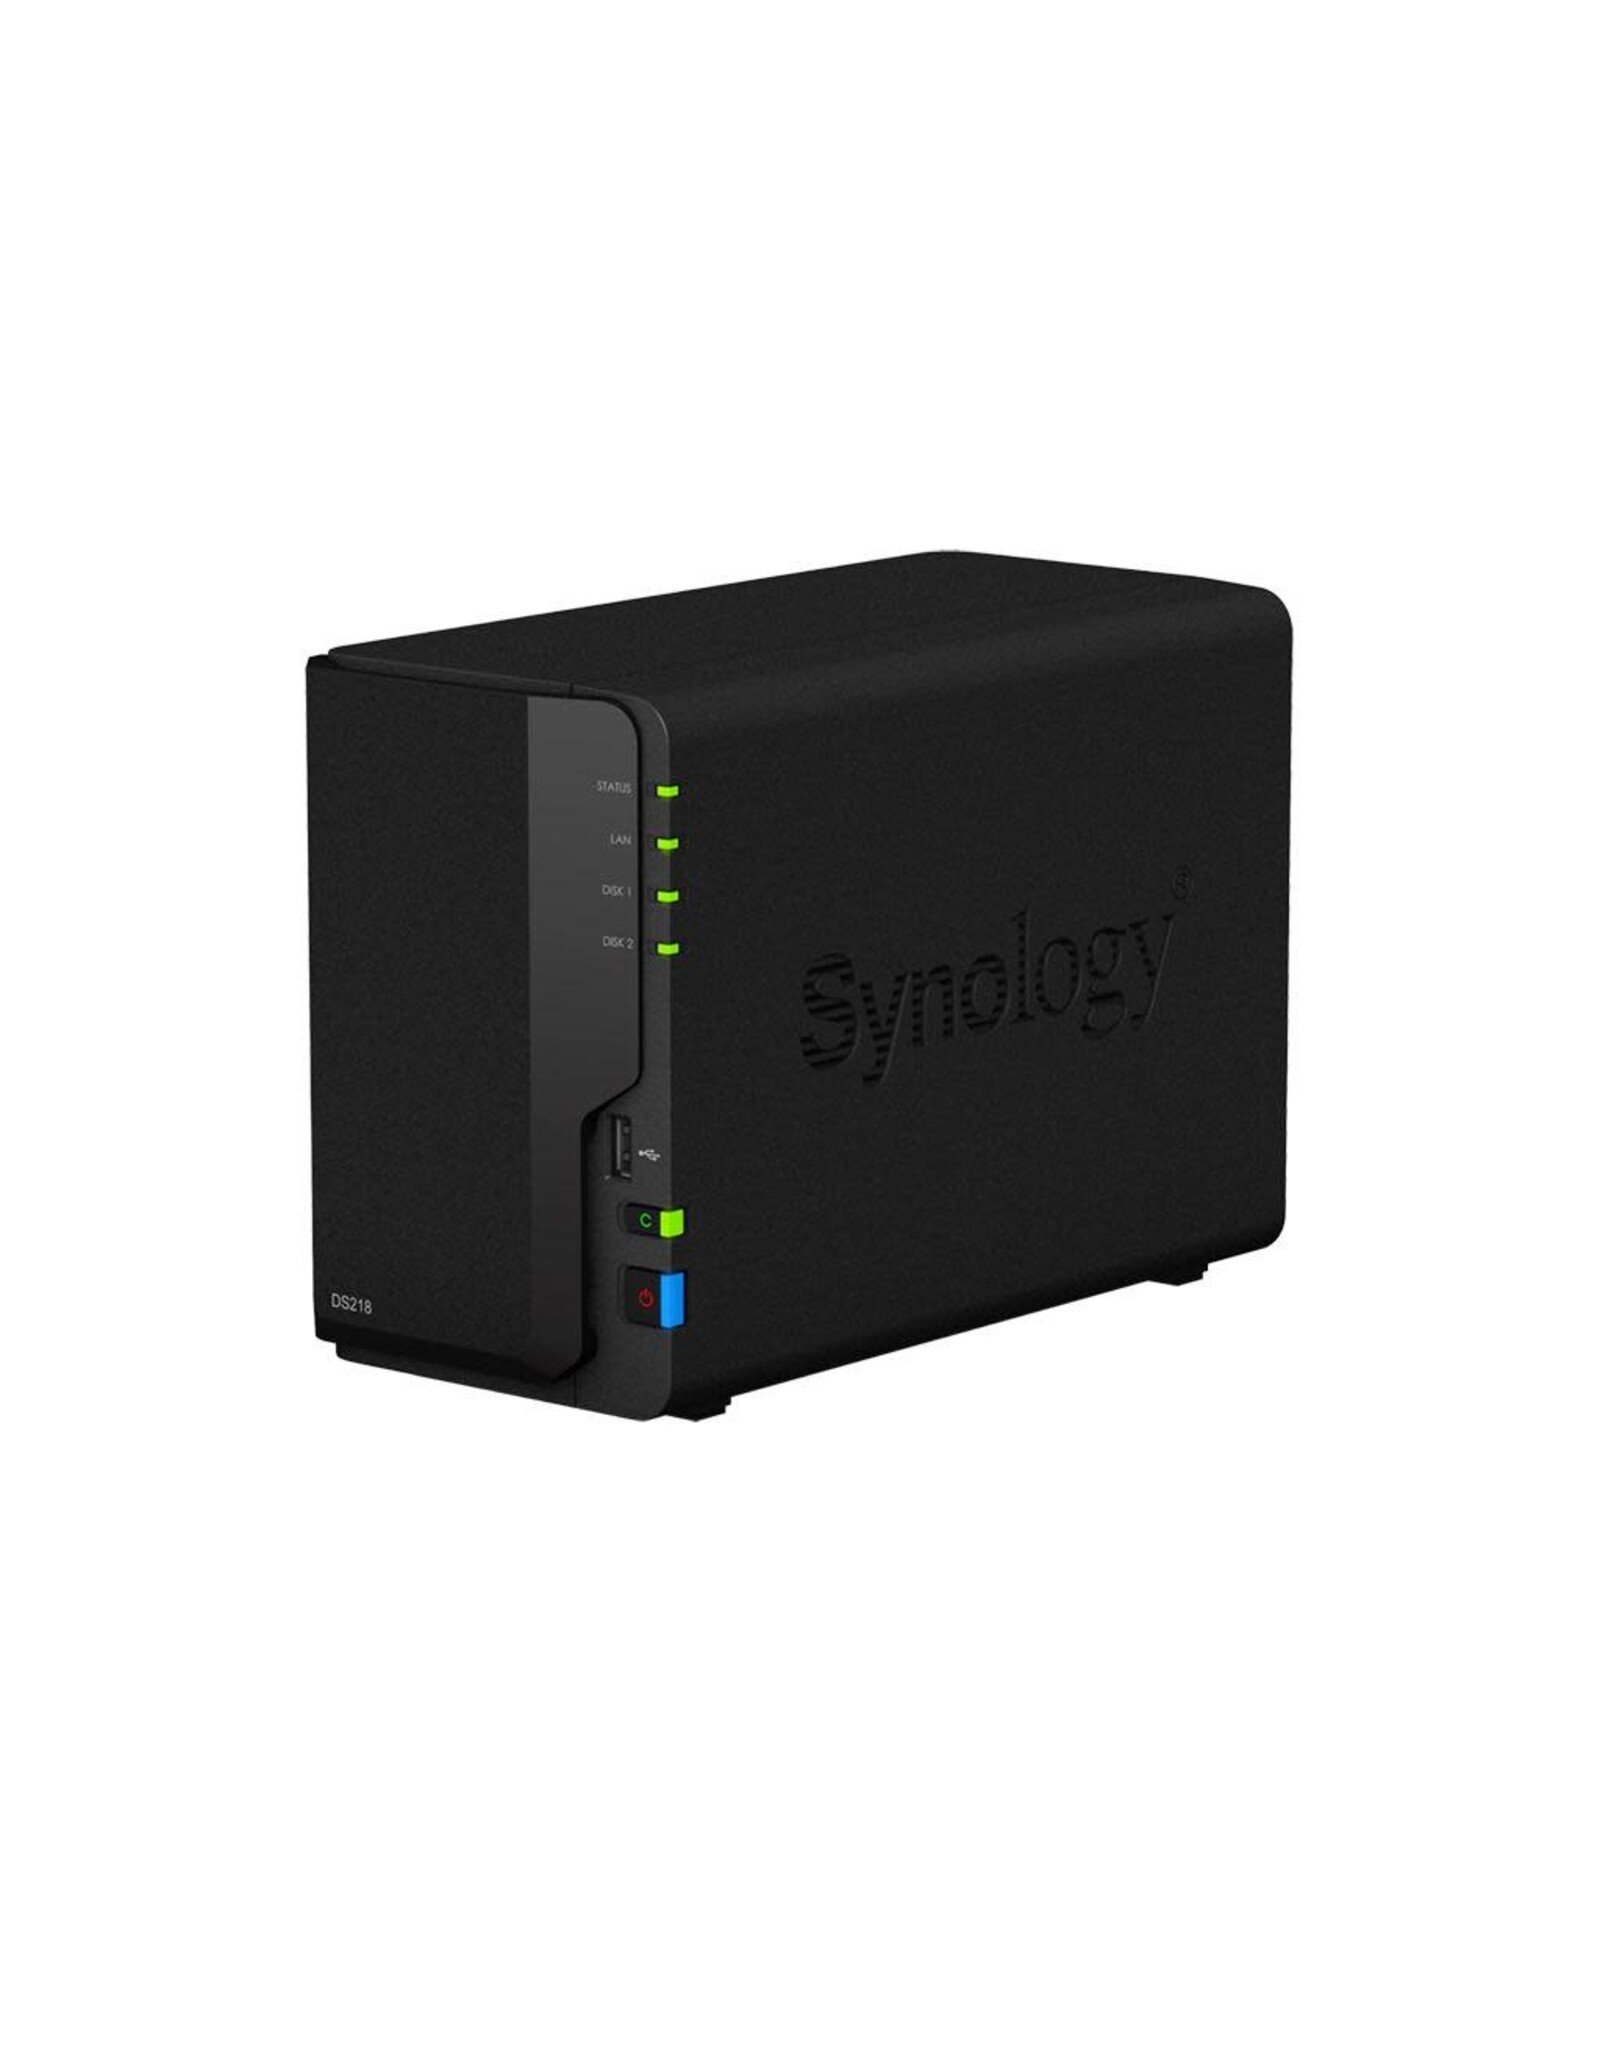 Synology Synology DS218 2-Bay Quad-core 1.4GHz NAS Server     2 x 14TB Seagate Ironwolf Pro